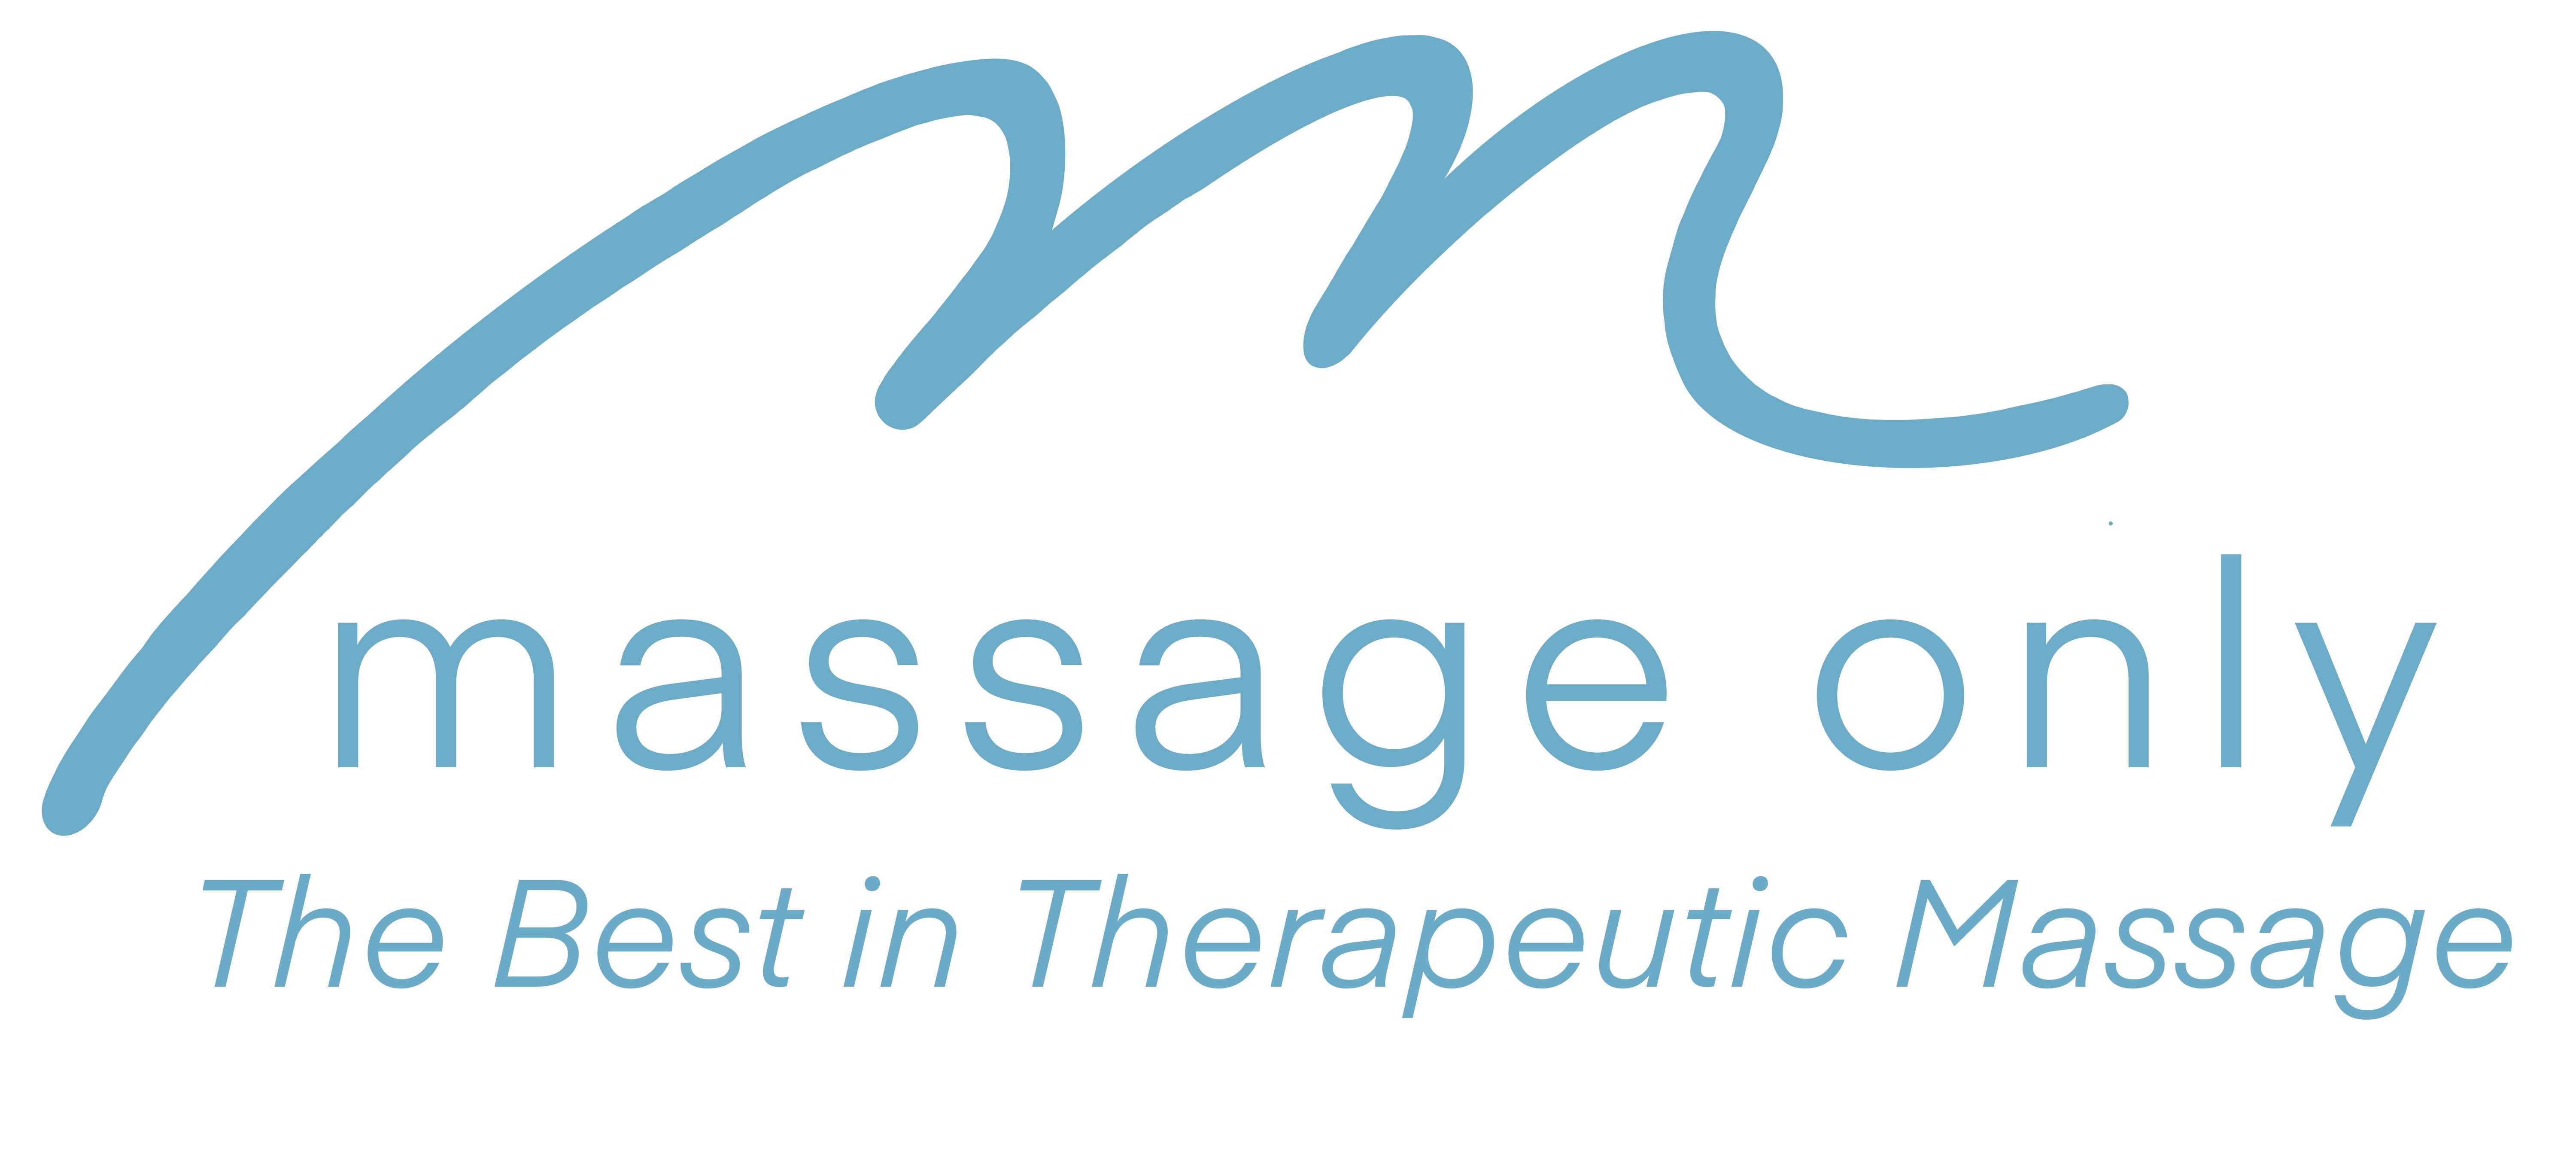 The Buckhead Massage Company - Relaxing Massage Therapy in Atlanta & Sandy  Springs - Best Massage in Atlanta & Sandy Springs